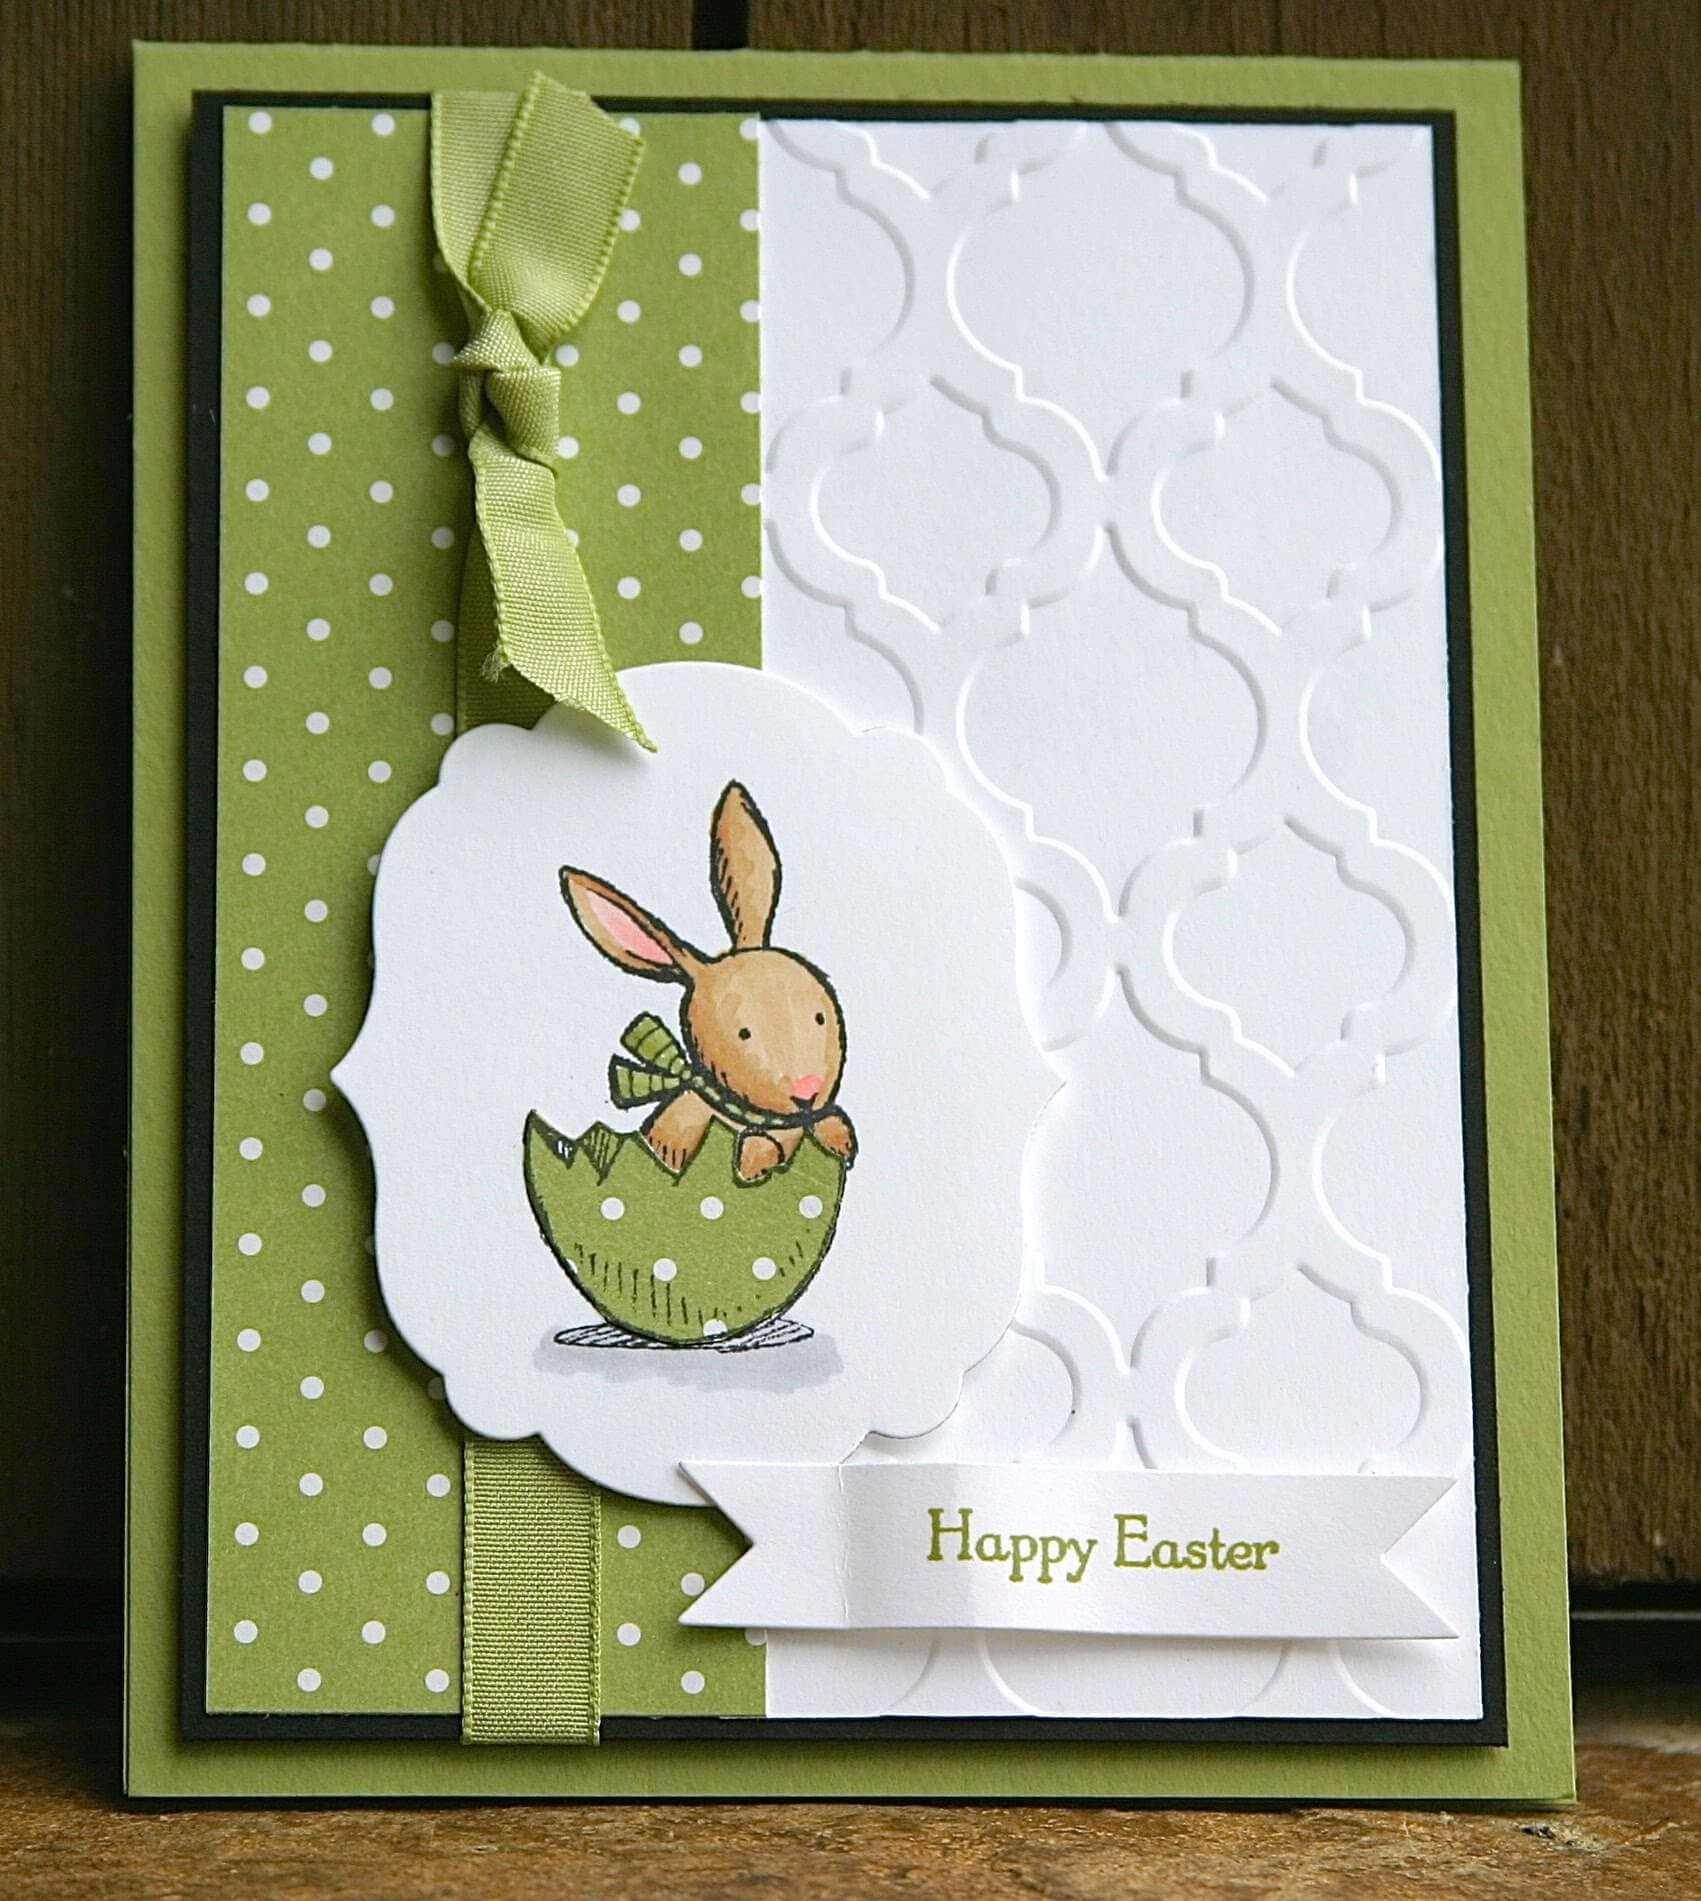 Easter Card Template Ks2 Pop Up Easter Card Bw 8.5×11 Throughout Easter Card Template Ks2